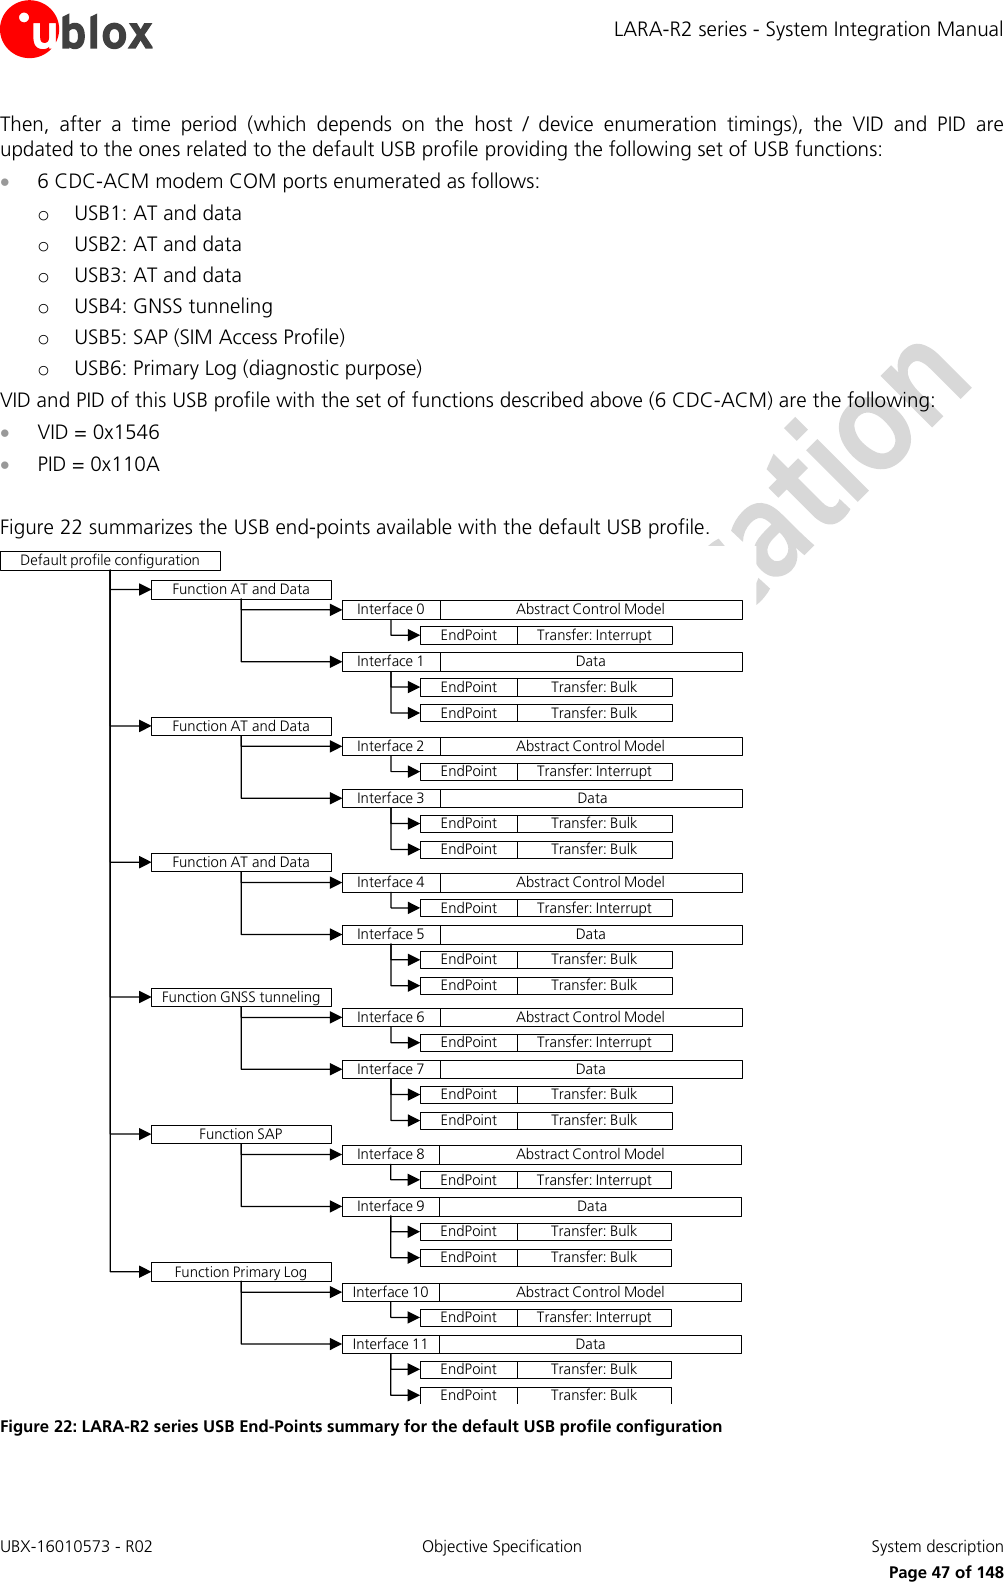 LARA-R2 series - System Integration Manual UBX-16010573 - R02 Objective Specification  System description     Page 47 of 148 Then,  after  a  time  period  (which  depends  on  the  host  /  device  enumeration  timings),  the  VID  and  PID  are updated to the ones related to the default USB profile providing the following set of USB functions:  6 CDC-ACM modem COM ports enumerated as follows: o USB1: AT and data o USB2: AT and data o USB3: AT and data o USB4: GNSS tunneling  o USB5: SAP (SIM Access Profile) o USB6: Primary Log (diagnostic purpose) VID and PID of this USB profile with the set of functions described above (6 CDC-ACM) are the following:  VID = 0x1546  PID = 0x110A  Figure 22 summarizes the USB end-points available with the default USB profile.  Default profile configurationInterface 0 Abstract Control ModelEndPoint Transfer: InterruptInterface 1 DataEndPoint Transfer: BulkEndPoint Transfer: BulkFunction AT and DataInterface 2 Abstract Control ModelEndPoint Transfer: InterruptInterface 3 DataEndPoint Transfer: BulkEndPoint Transfer: BulkFunction AT and DataInterface 4 Abstract Control ModelEndPoint Transfer: InterruptInterface 5 DataEndPoint Transfer: BulkEndPoint Transfer: BulkFunction AT and DataInterface 6 Abstract Control ModelEndPoint Transfer: InterruptInterface 7 DataEndPoint Transfer: BulkEndPoint Transfer: BulkFunction GNSS tunnelingInterface 8 Abstract Control ModelEndPoint Transfer: InterruptInterface 9 DataEndPoint Transfer: BulkEndPoint Transfer: BulkFunction SAPInterface 10 Abstract Control ModelEndPoint Transfer: InterruptInterface 11 DataEndPoint Transfer: BulkEndPoint Transfer: BulkFunction Primary Log Figure 22: LARA-R2 series USB End-Points summary for the default USB profile configuration  